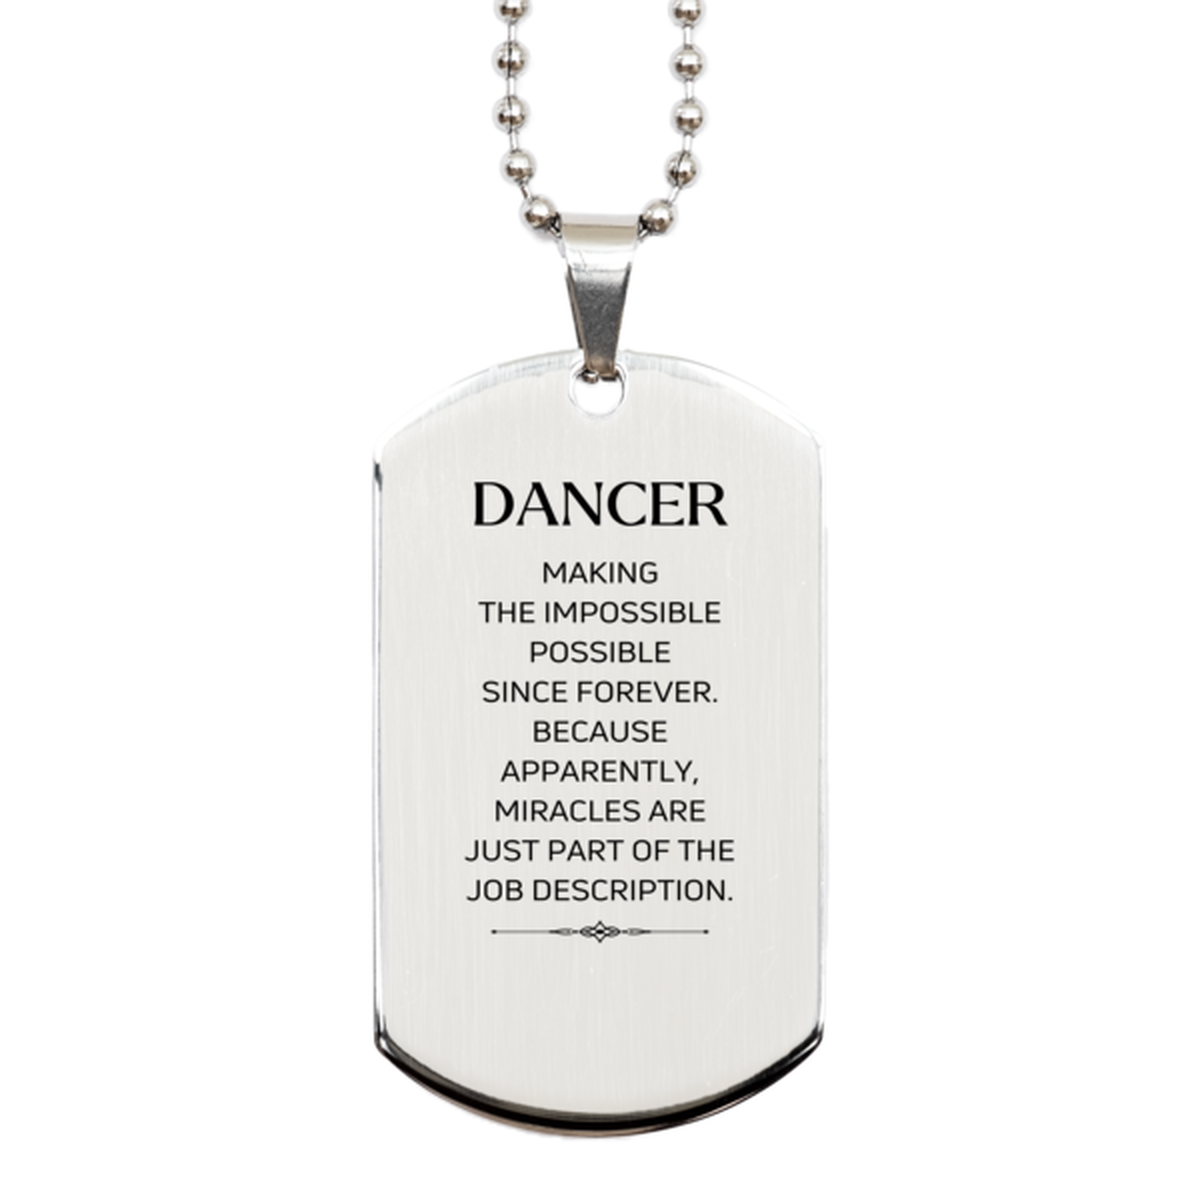 Funny Dancer Gifts, Miracles are just part of the job description, Inspirational Birthday Silver Dog Tag For Dancer, Men, Women, Coworkers, Friends, Boss